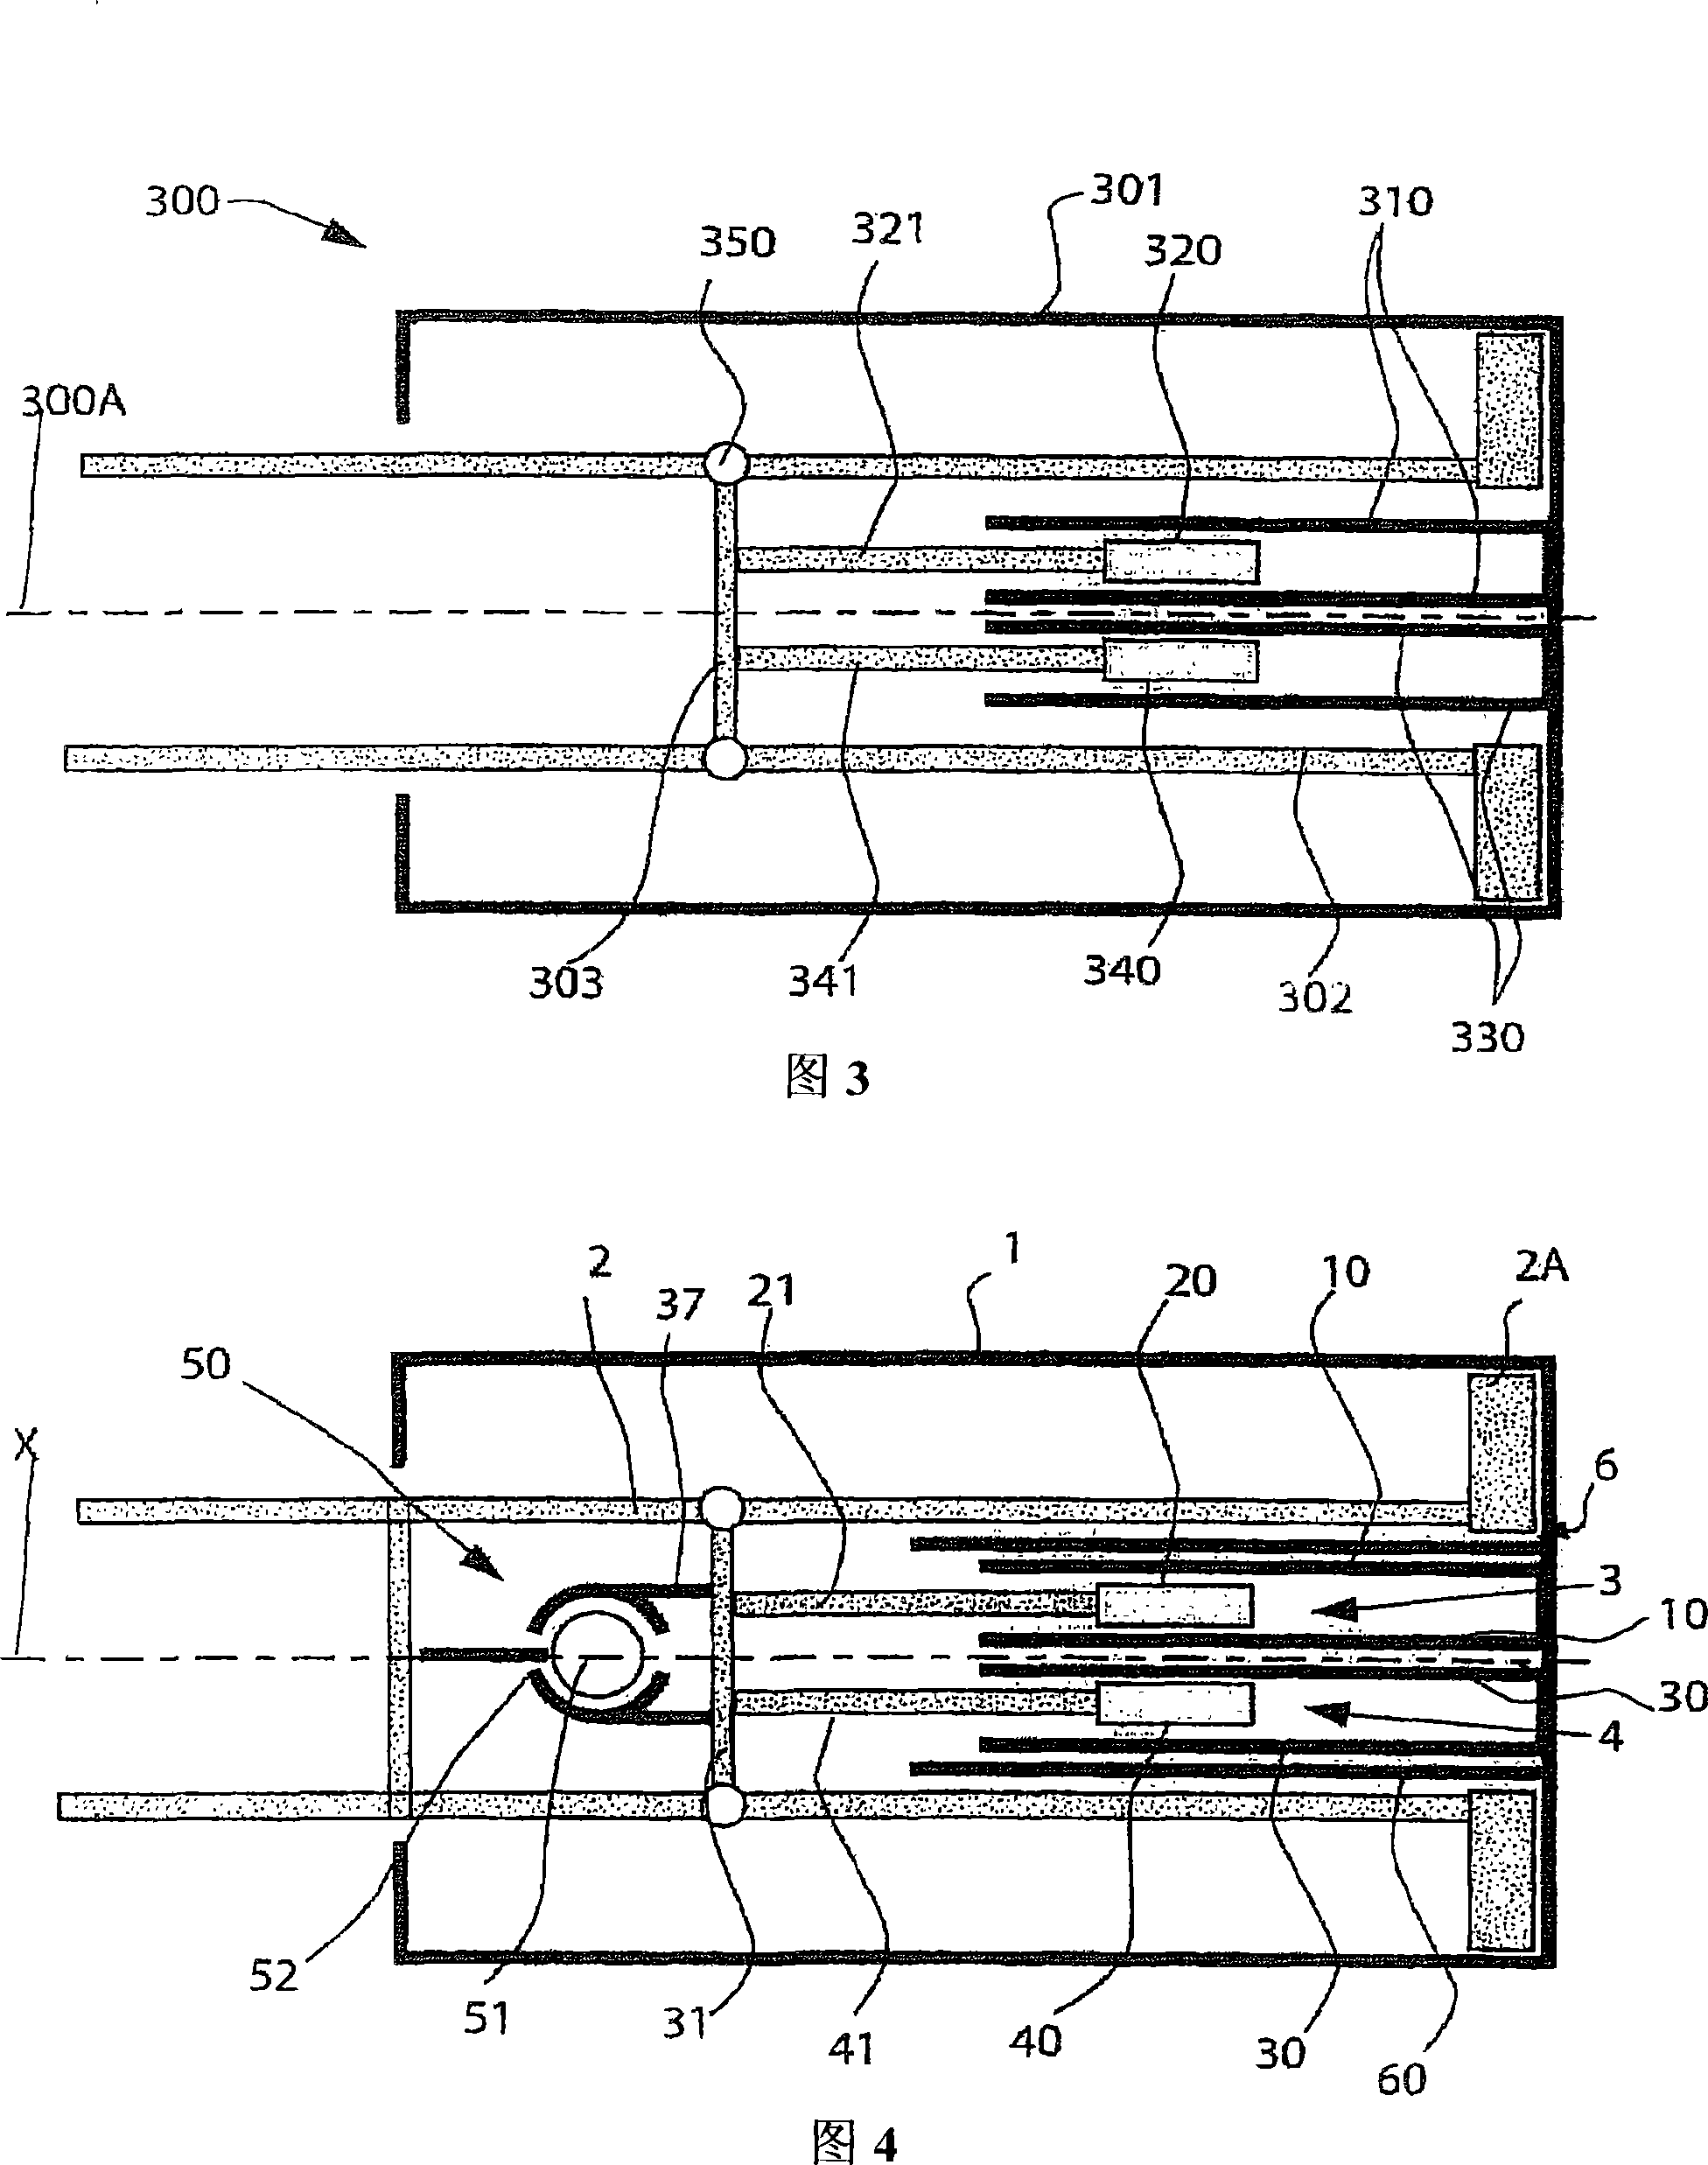 Apparatus for measuring the position of a piston in a cylinder